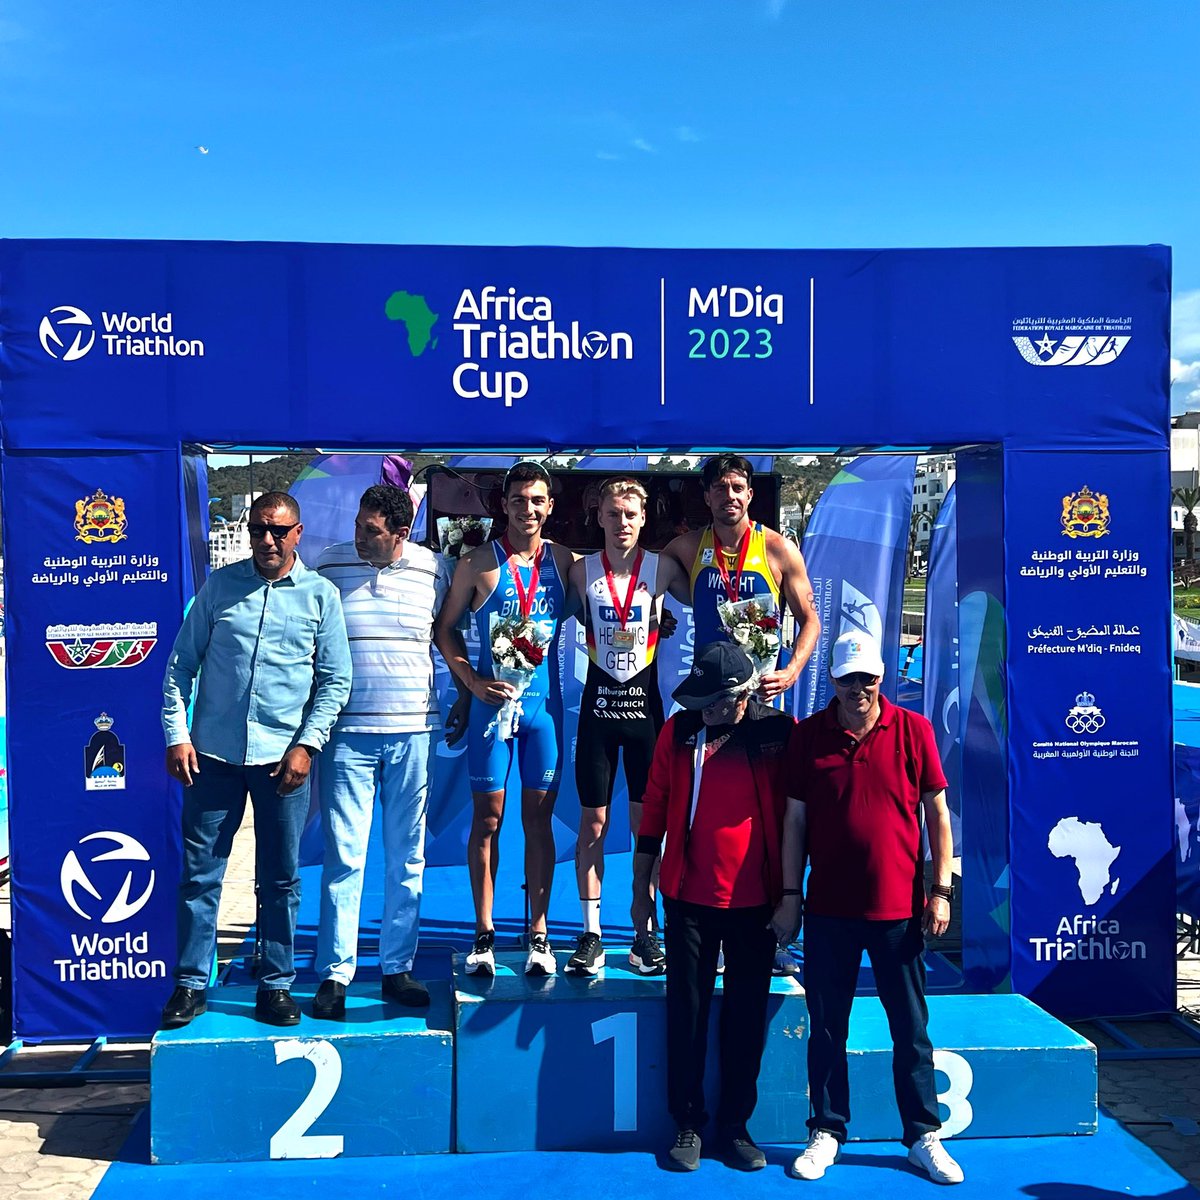 Back to back podiums 🥉🥉🔥🙌🏼😎. Birthday weekend celebrated a little differently 🥳. 3rd @worldtriathlon M’Diq African Cup on Sunday, climbing the World ranking and big Olympic points gained. Racing again Friday morning in Egypt, no rest for the wicked 🇧🇧💥 @Olympicbb @CES_Sport